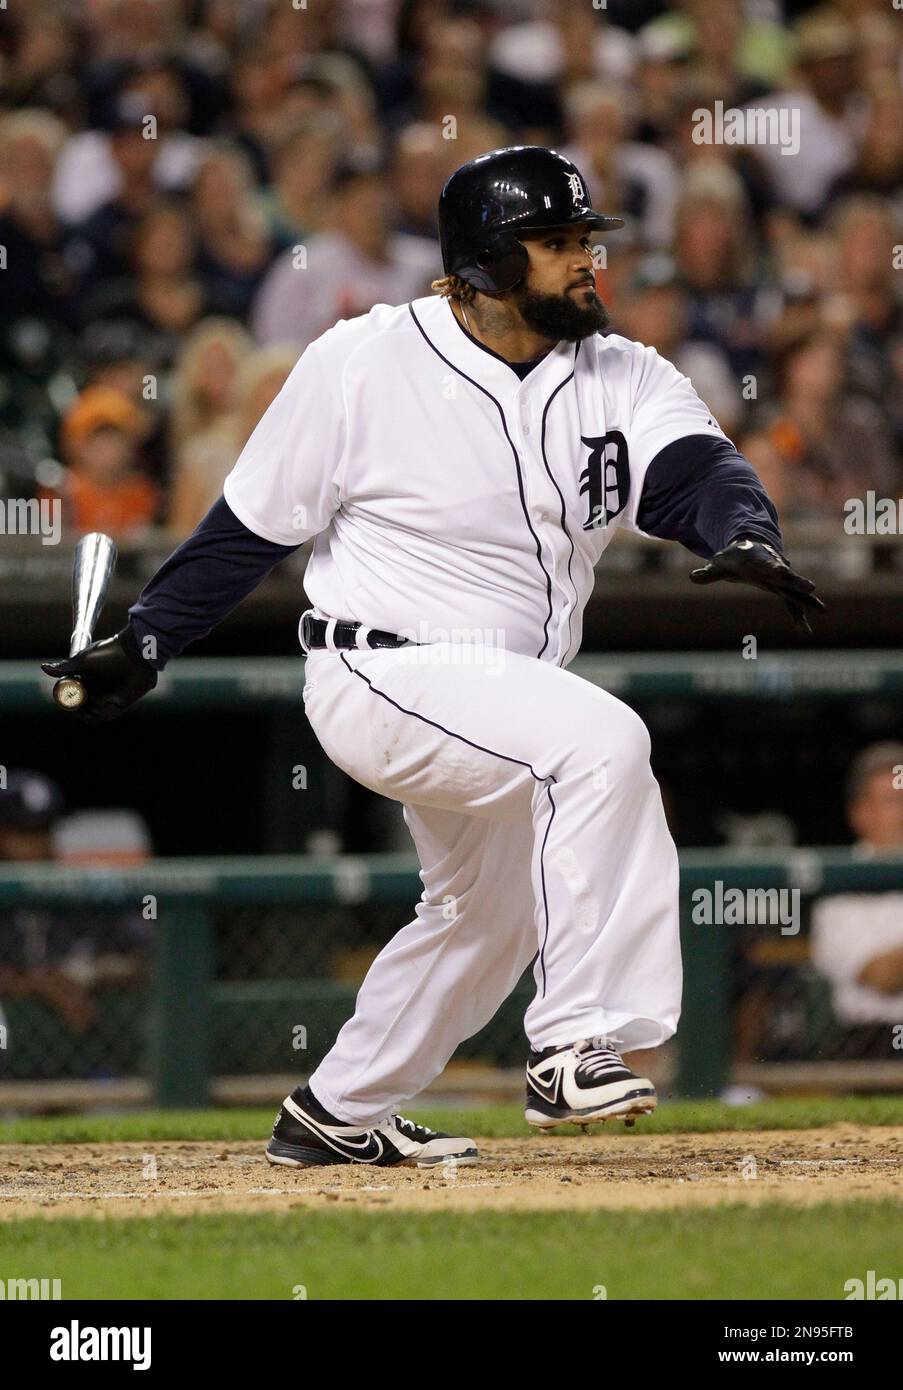 Detroit Tigers' Prince Fielder bats against the Chicago White sox during a  baseball game Saturday, Sept. 1, 2012 in Detroit. (AP Photo/Duane Burleson  Stock Photo - Alamy